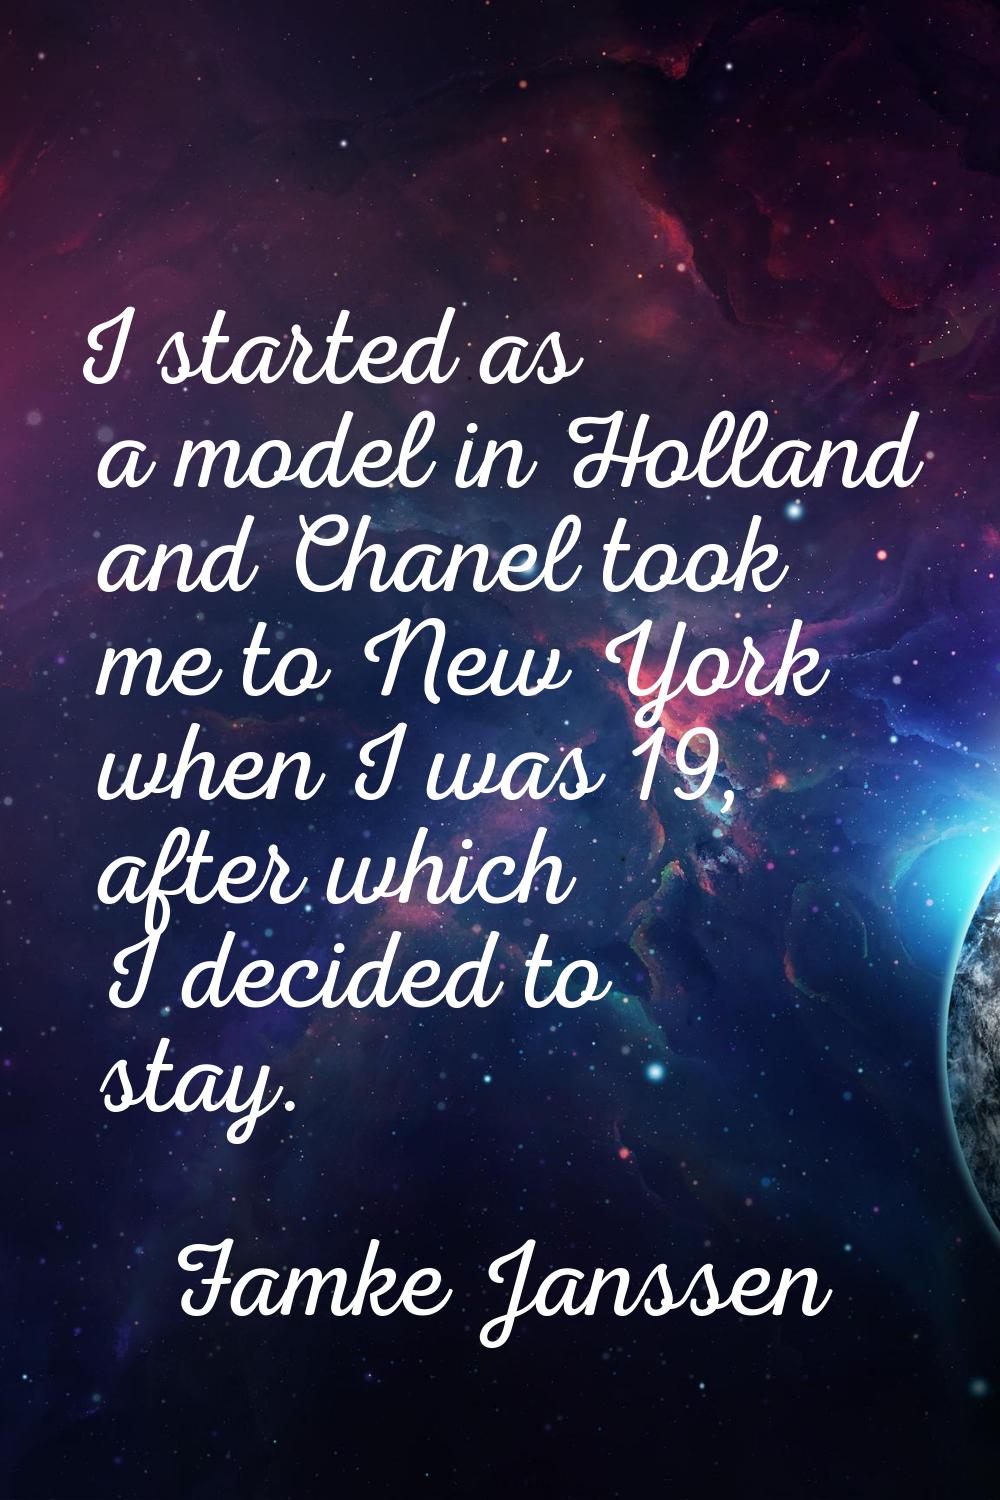 I started as a model in Holland and Chanel took me to New York when I was 19, after which I decided